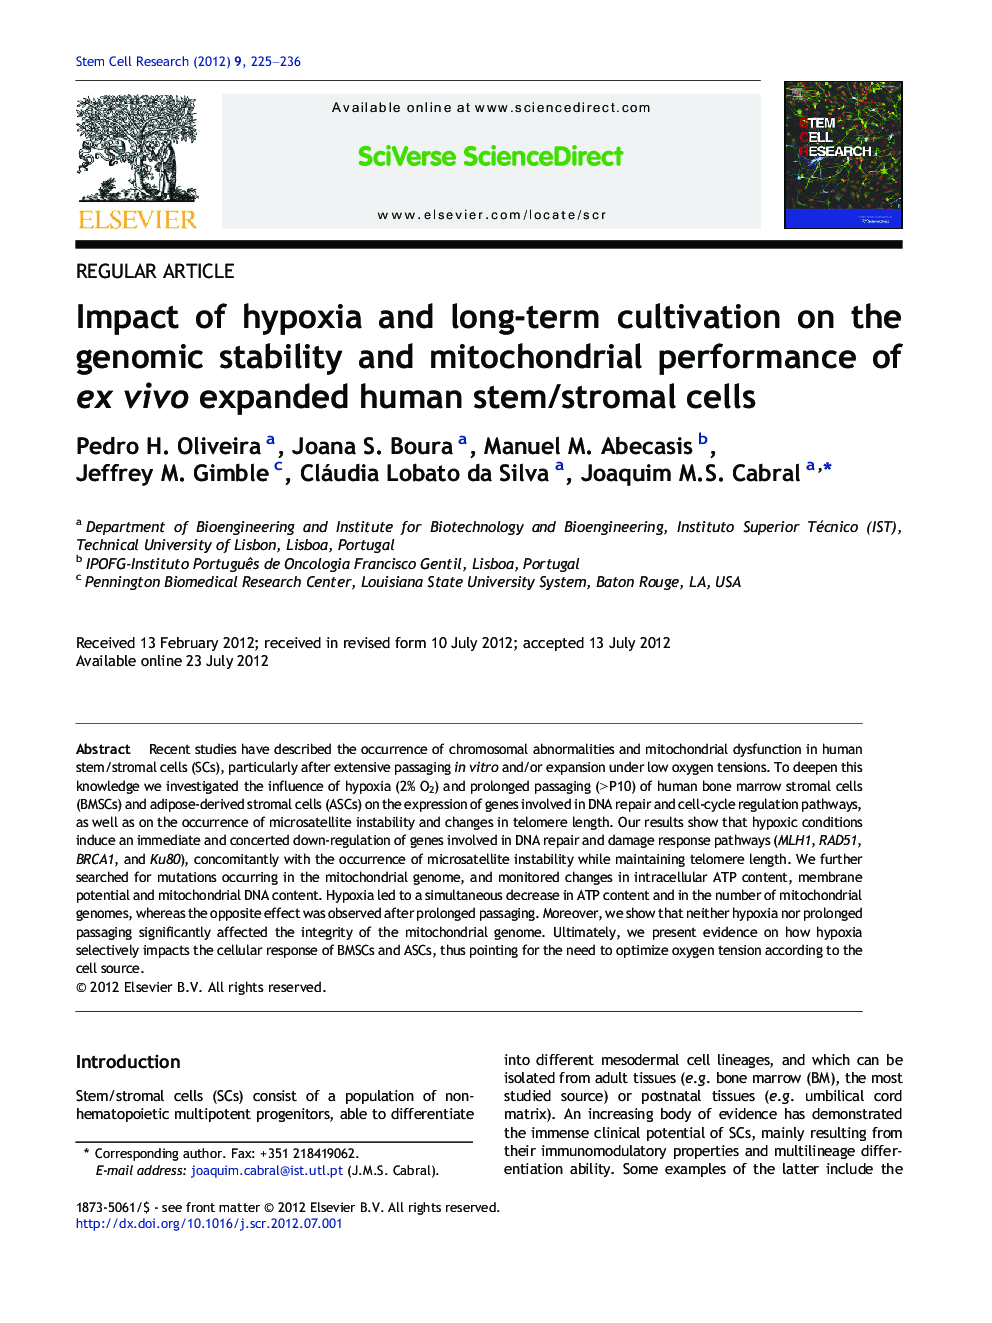 Impact of hypoxia and long-term cultivation on the genomic stability and mitochondrial performance of ex vivo expanded human stem/stromal cells